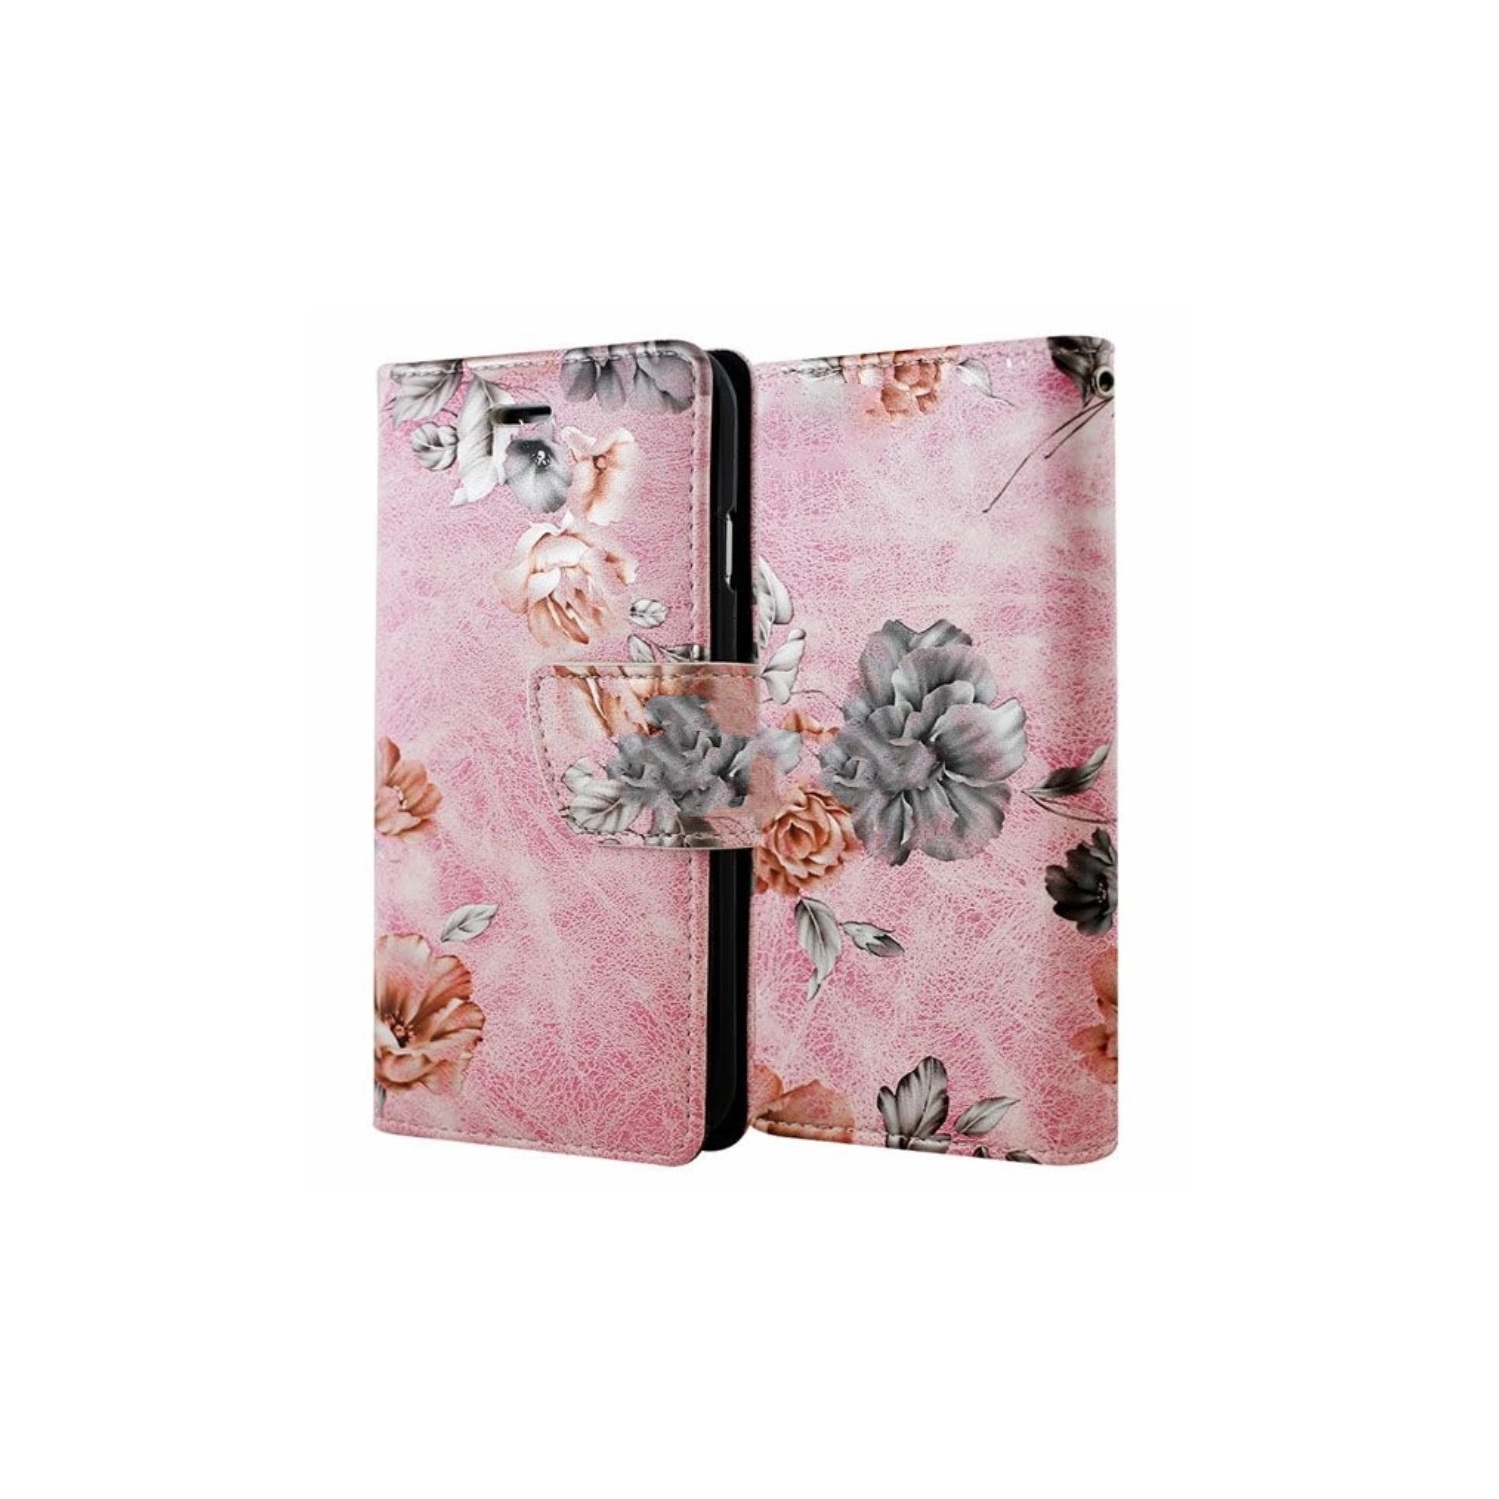 【CSmart】 Magnetic Card Slot Leather Folio Wallet Flip Case Cover for iPhone 12 Mini (5.4"), Pink Flower